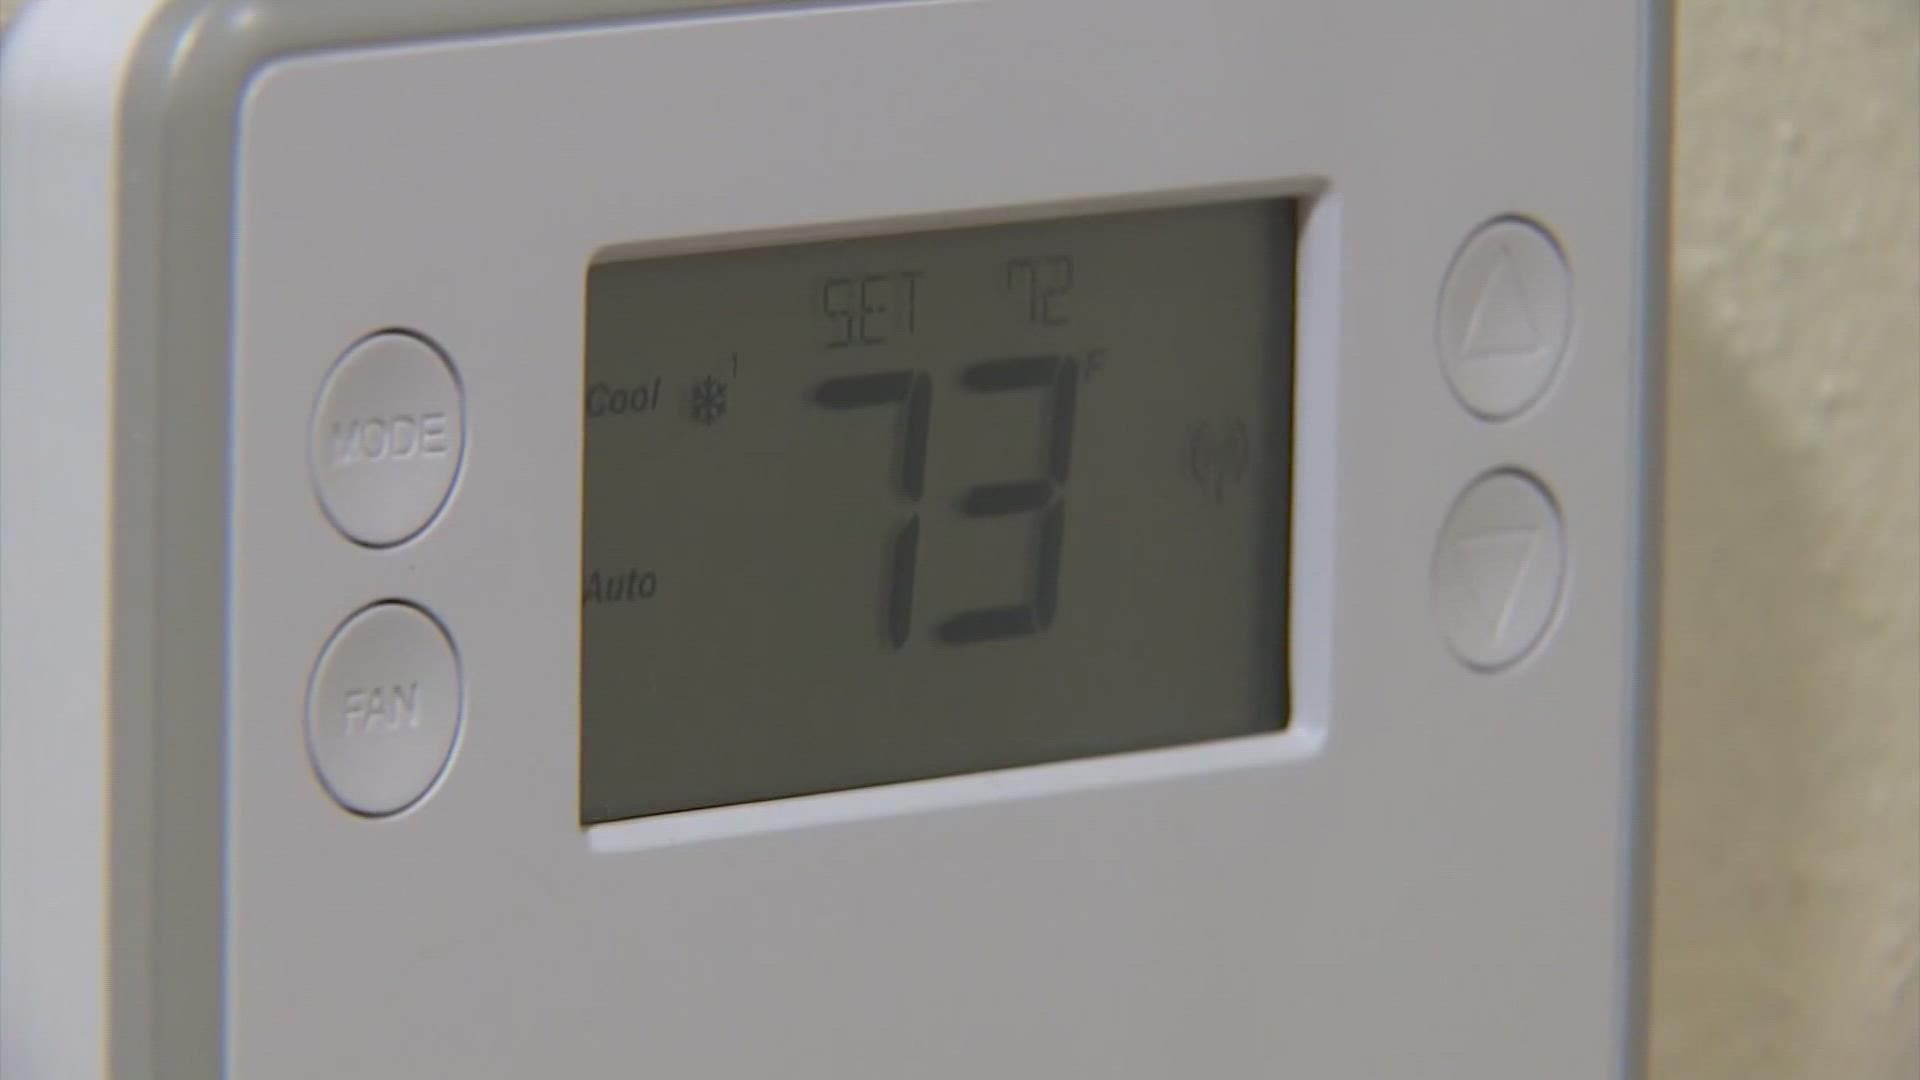 TXU and CenterPoint are among the companies who are able to change your thermostat remotely in an effort to conserve power.